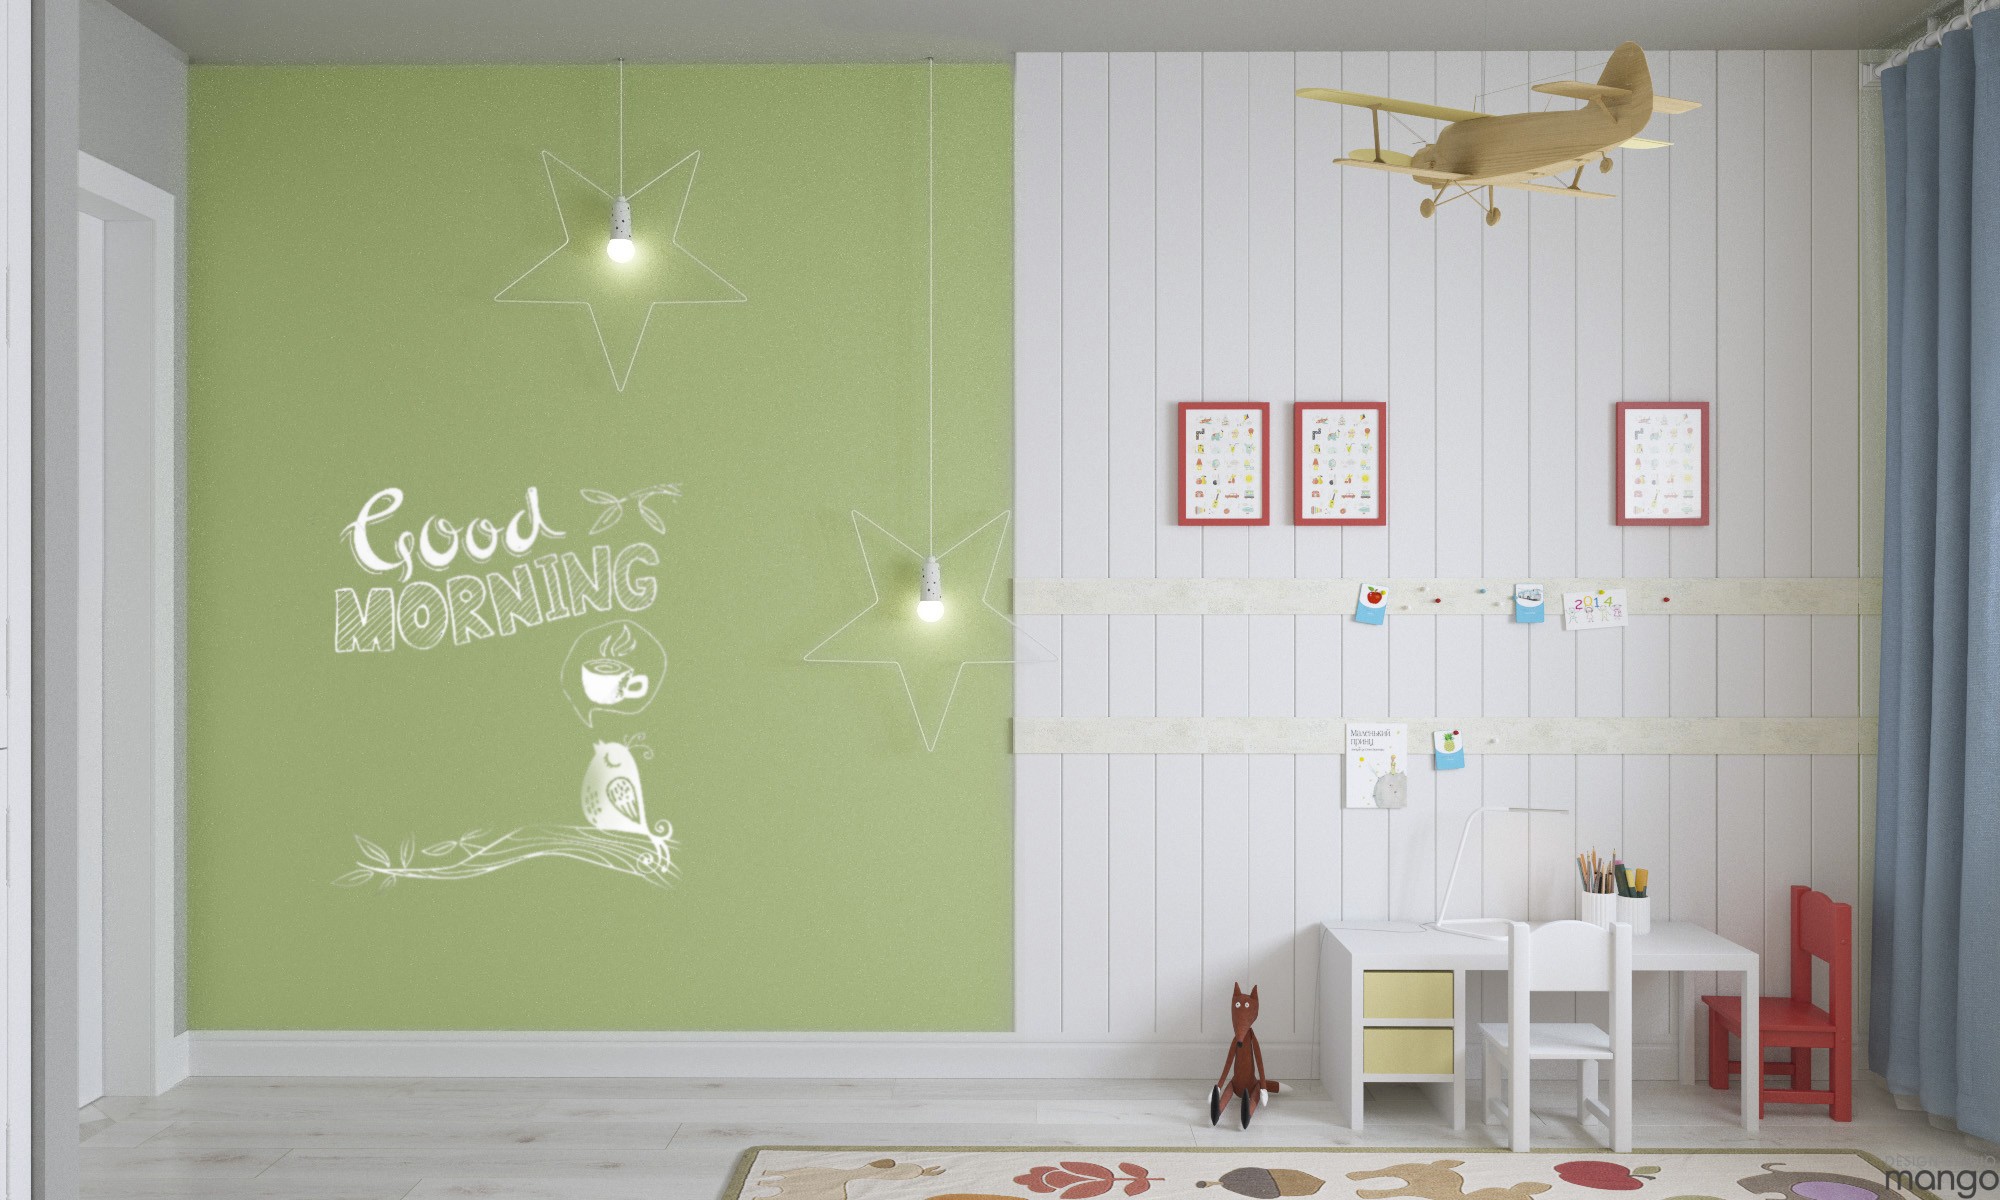 green wall decor "width =" 2000 "height =" 1200 "srcset =" https://mileray.com/wp-content/uploads/2020/05/1588509008_944_Colorful-Kids-Room-Designs-With-Adorable-Decor-In-It-That.jpg 2000w, https: // myfashionos. de / wp-content / uploads / 2016/10 / Design-Studio-Mango4-300x180.jpg 300w, https://mileray.com/wp-content/uploads/2016/10/Design-Studio-Mango4-768x461.jpg 768w, https://mileray.com/wp-content/uploads/2016/10/Design-Studio-Mango4-1024x614.jpg 1024w, https://mileray.com/wp-content/uploads/2016/10/Design -Studio-Mango4-696x418.jpg 696w, https://mileray.com/wp-content/uploads/2016/10/Design-Studio-Mango4-1068x641.jpg 1068w, https://mileray.com/wp-content /uploads/2016/10/Design-Studio-Mango4-700x420.jpg 700w "sizes =" (maximum width: 2000px) 100vw, 2000px